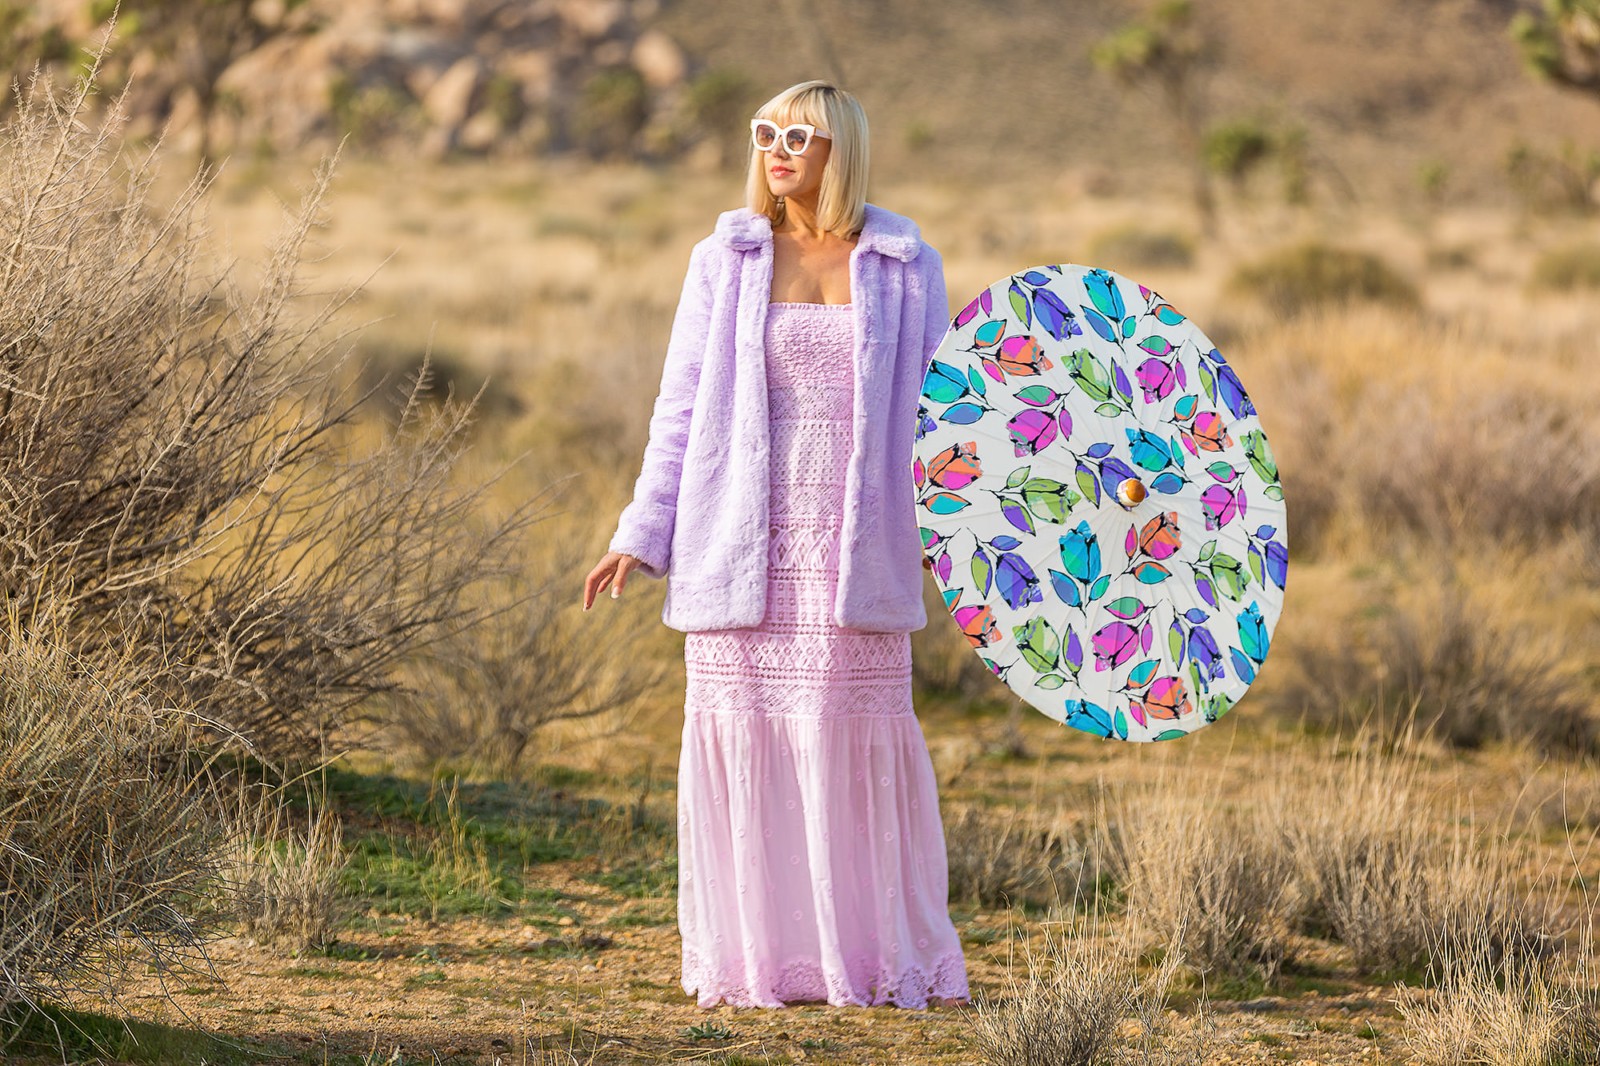 CatherineGraceO in Joshua Tree National Park with Lily Lark Parasol